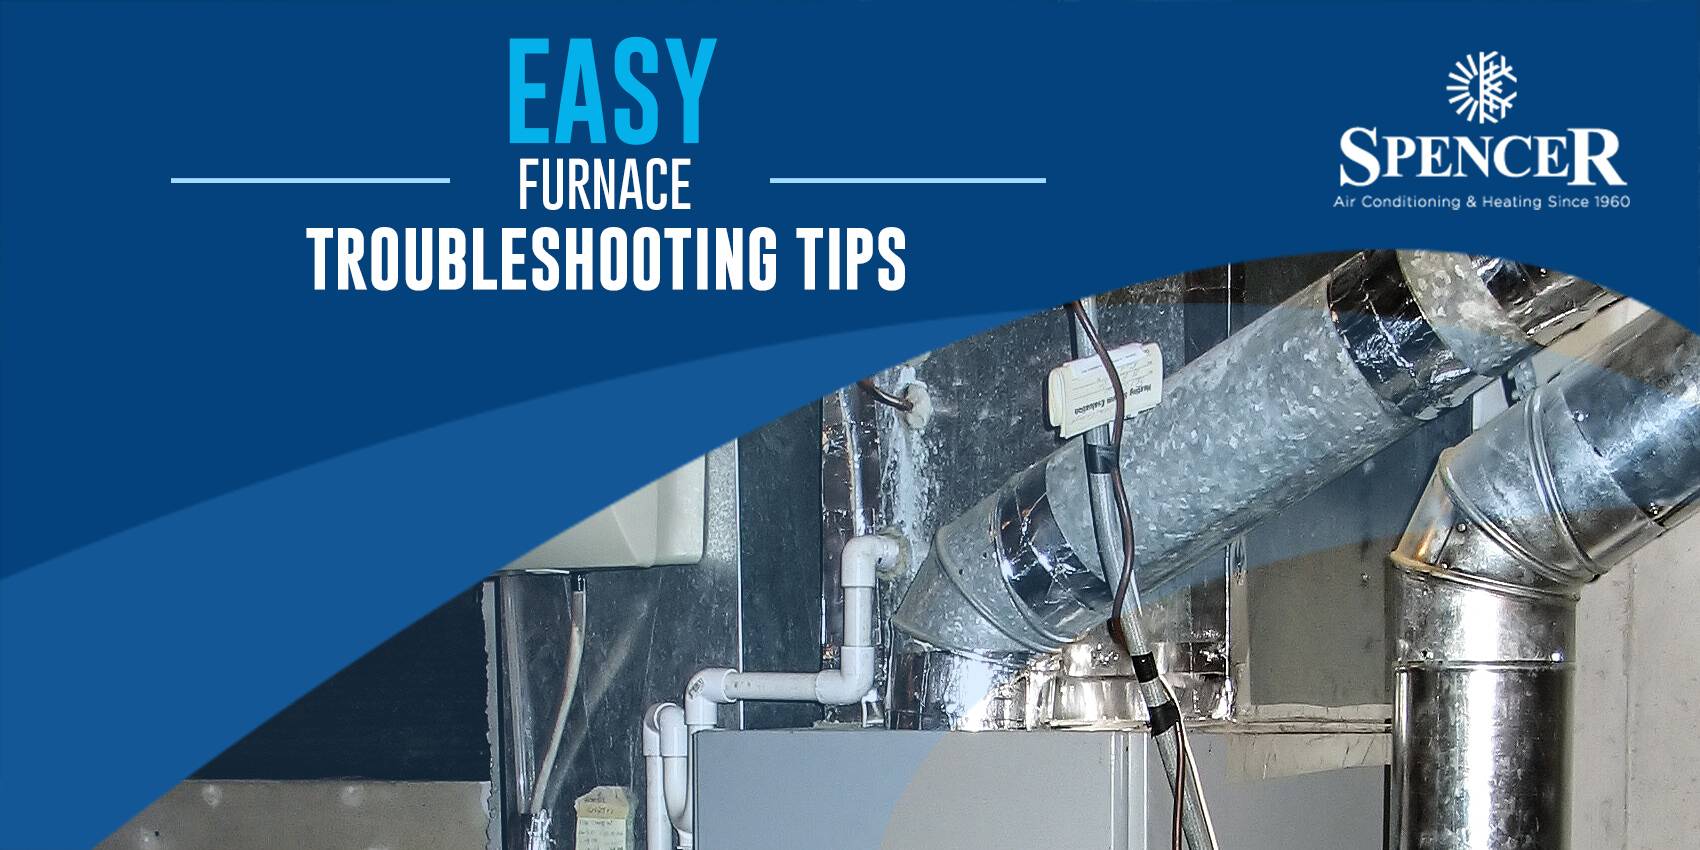 spencer Easy Furnace troubeshooting tips